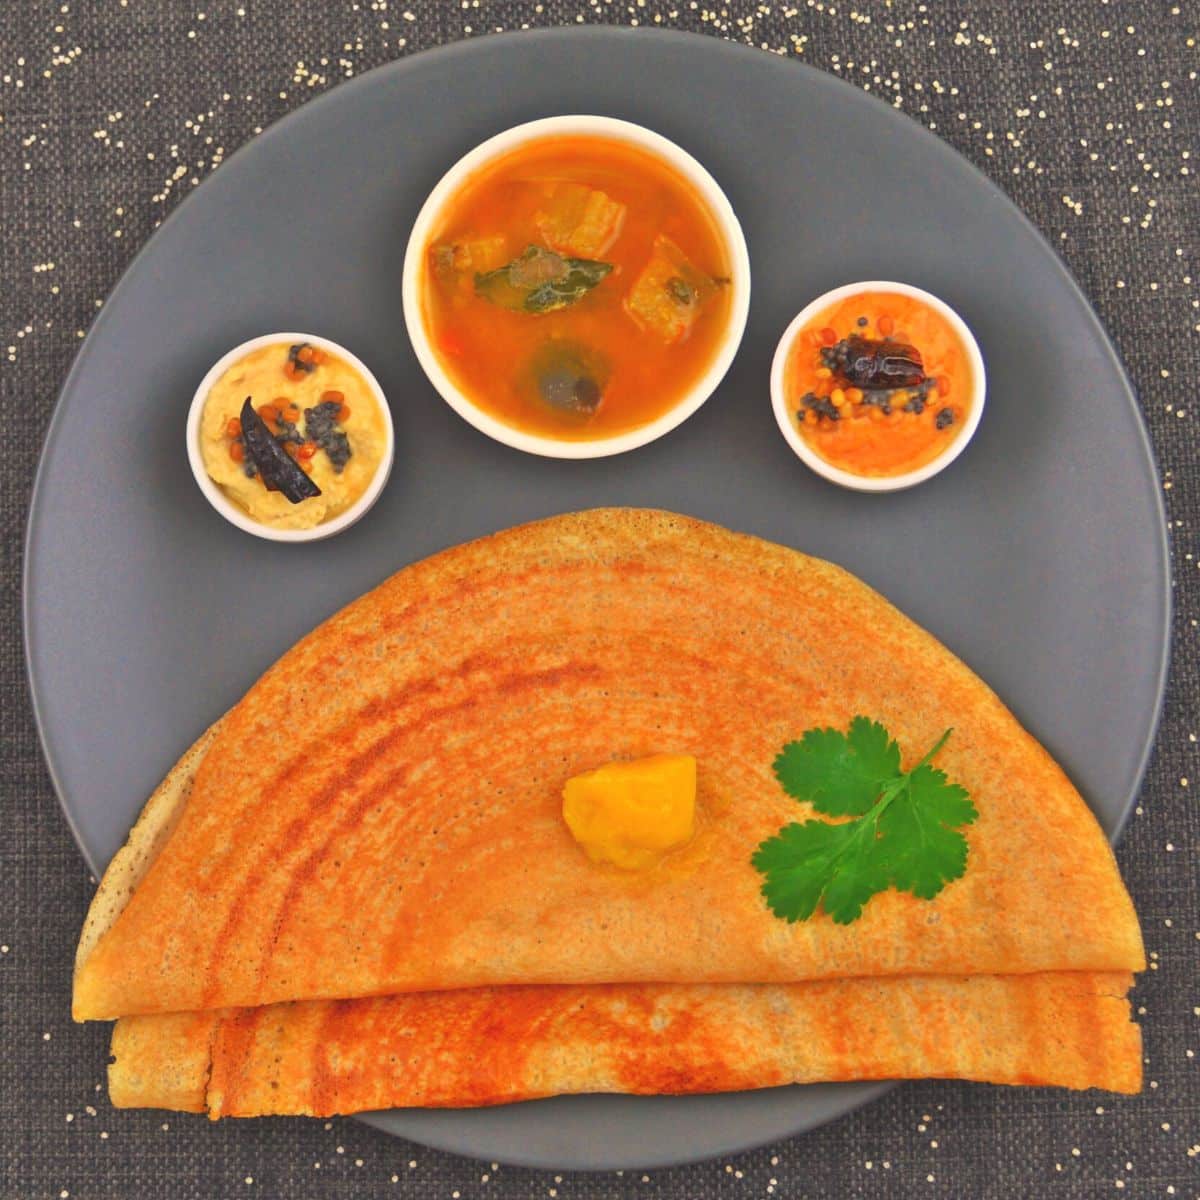 mixed millet dosa on a black plate along with chutneys and sambar.